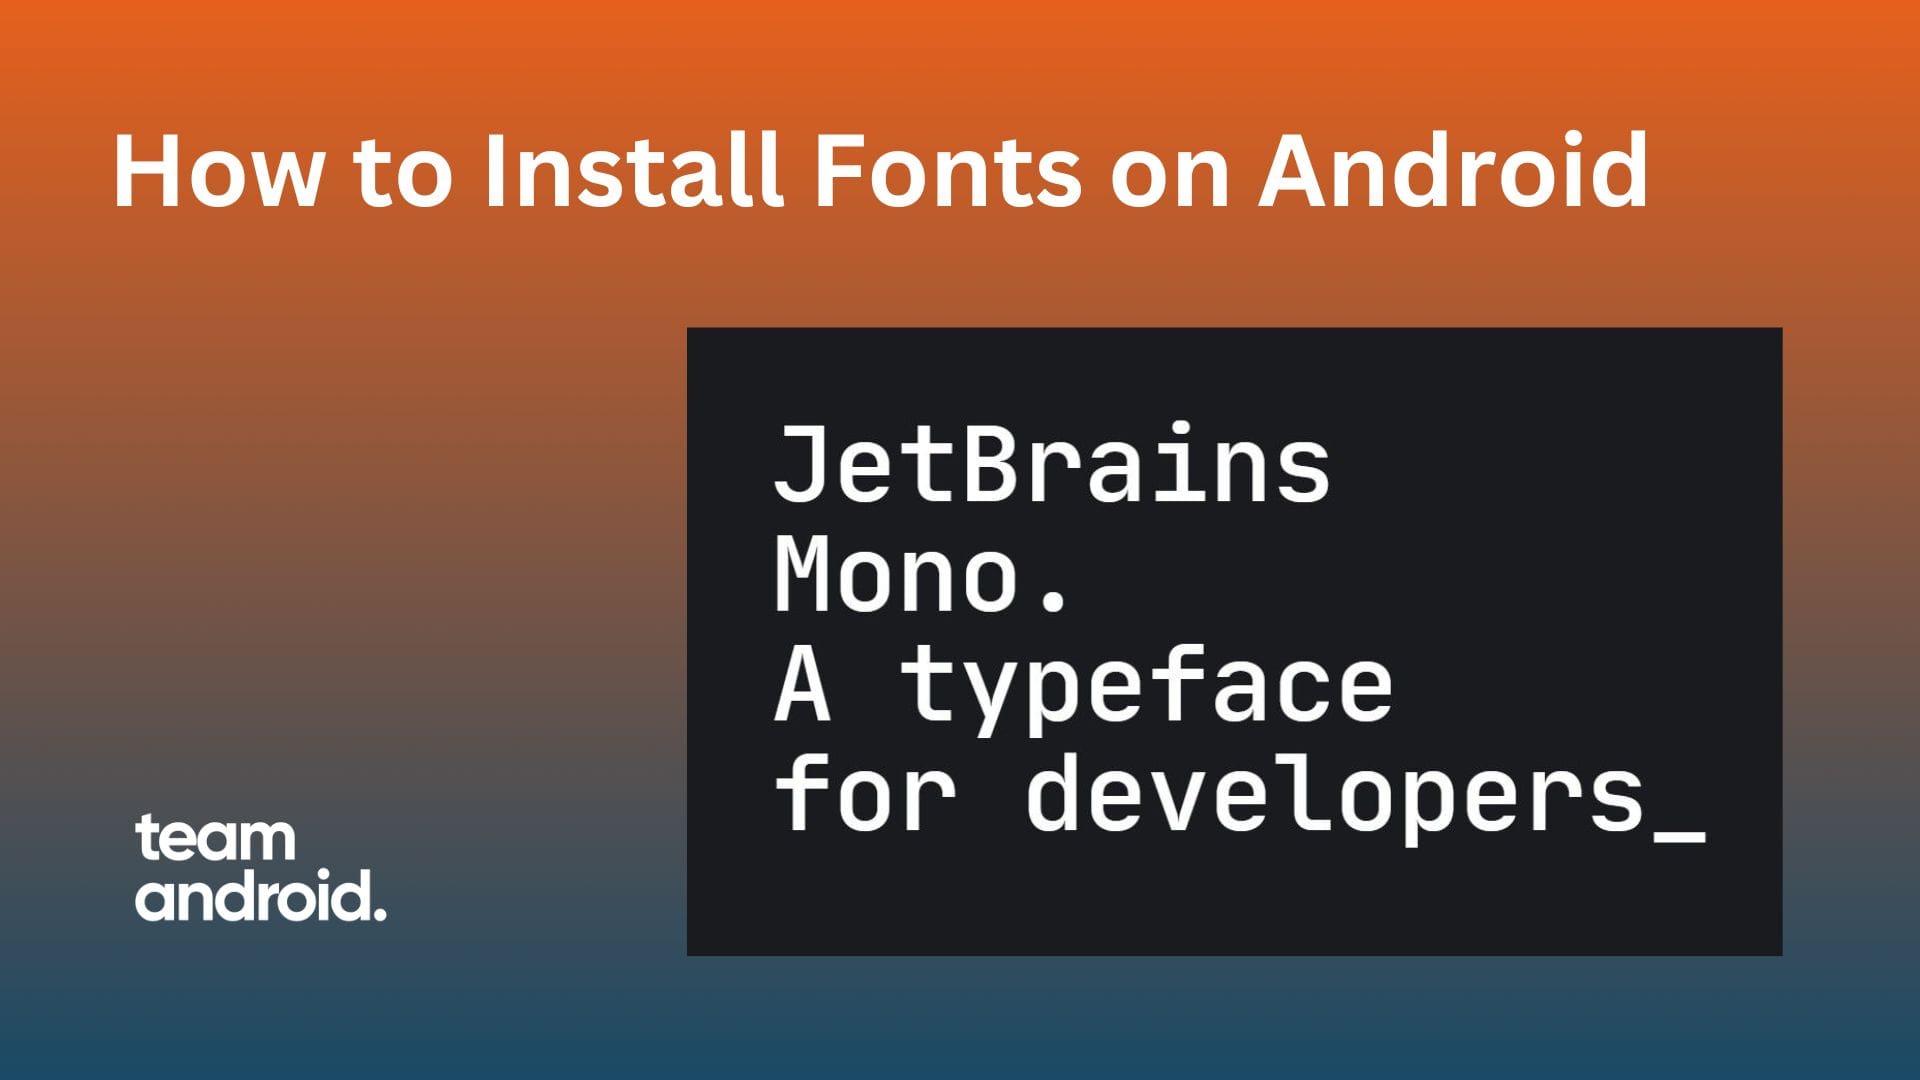 How to Install Fonts on Android